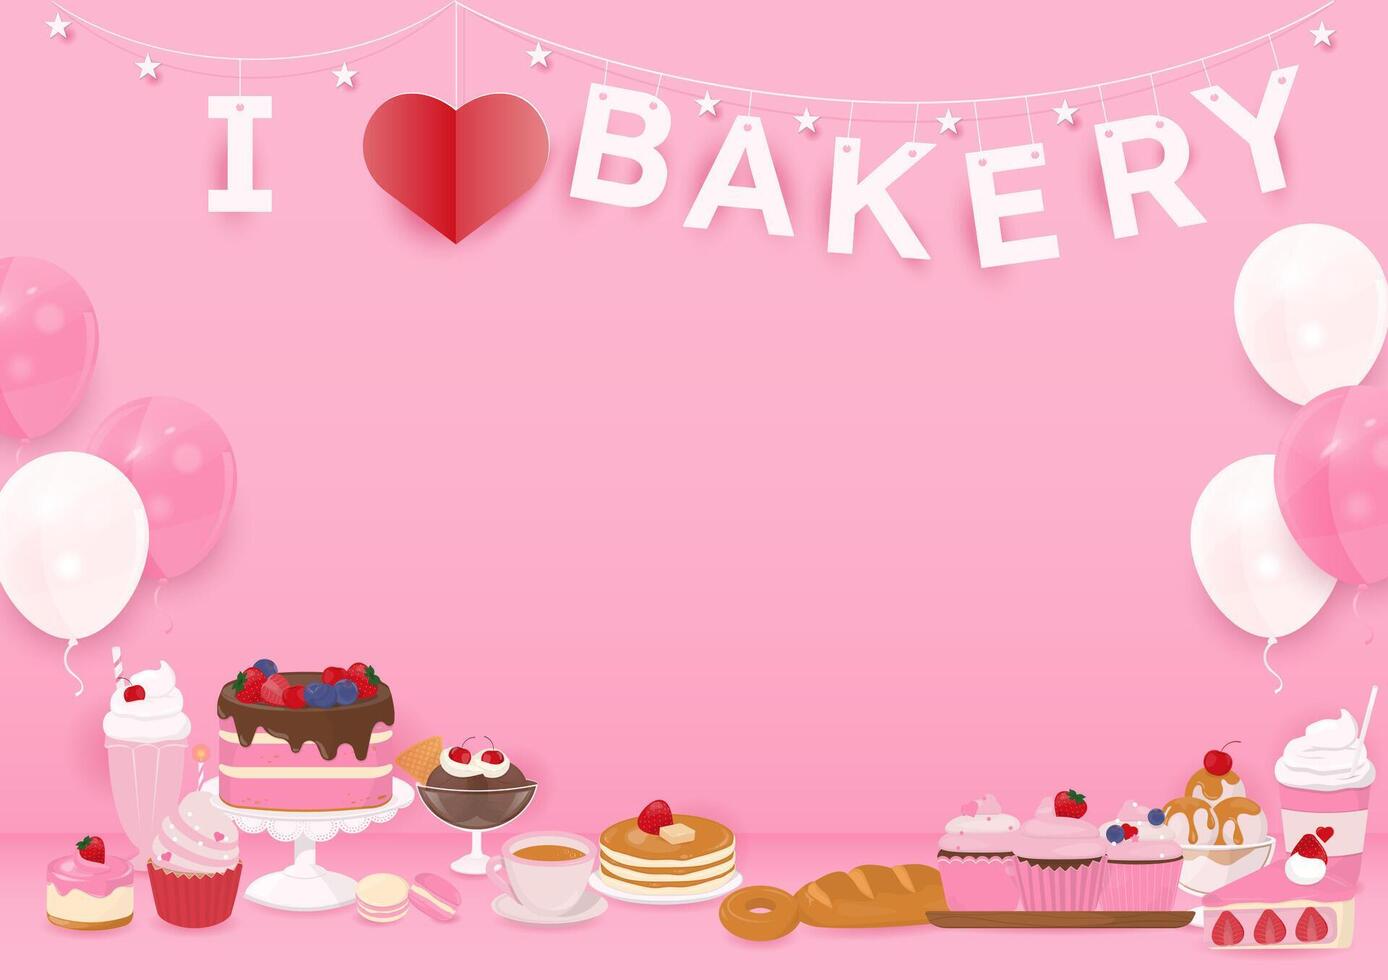 Bakery and helium balloons on pink background vector